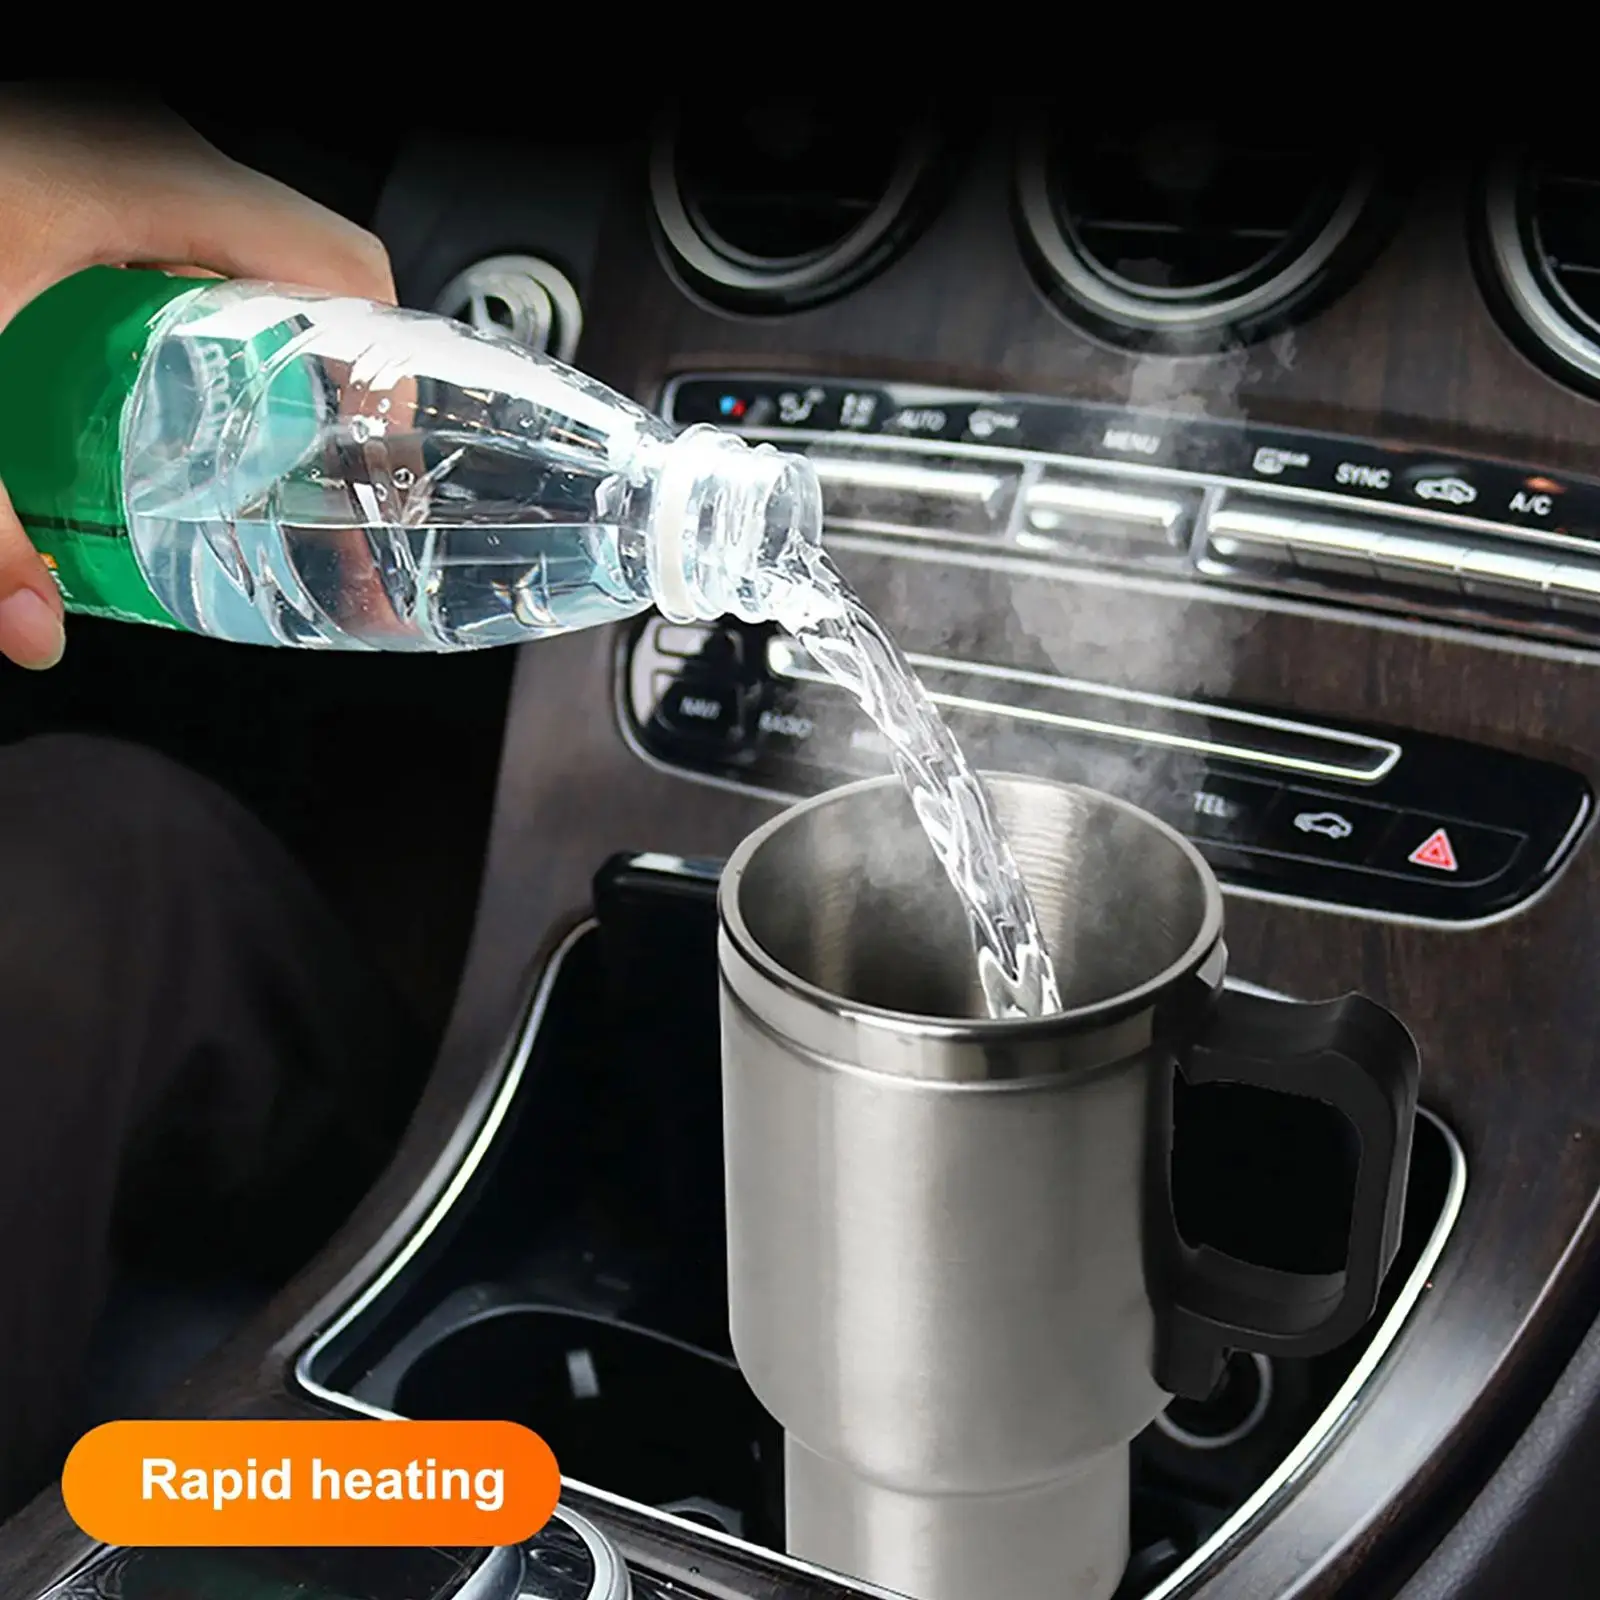 https://ae01.alicdn.com/kf/S736acb6b45e8412ab5da8c323d24fa4ft/12V-450ml-Stainless-Steel-Vehicle-Heating-Cup-Electric-Heating-Car-Kettle-Camping-Travel-Kettle-Water-Coffee.jpg